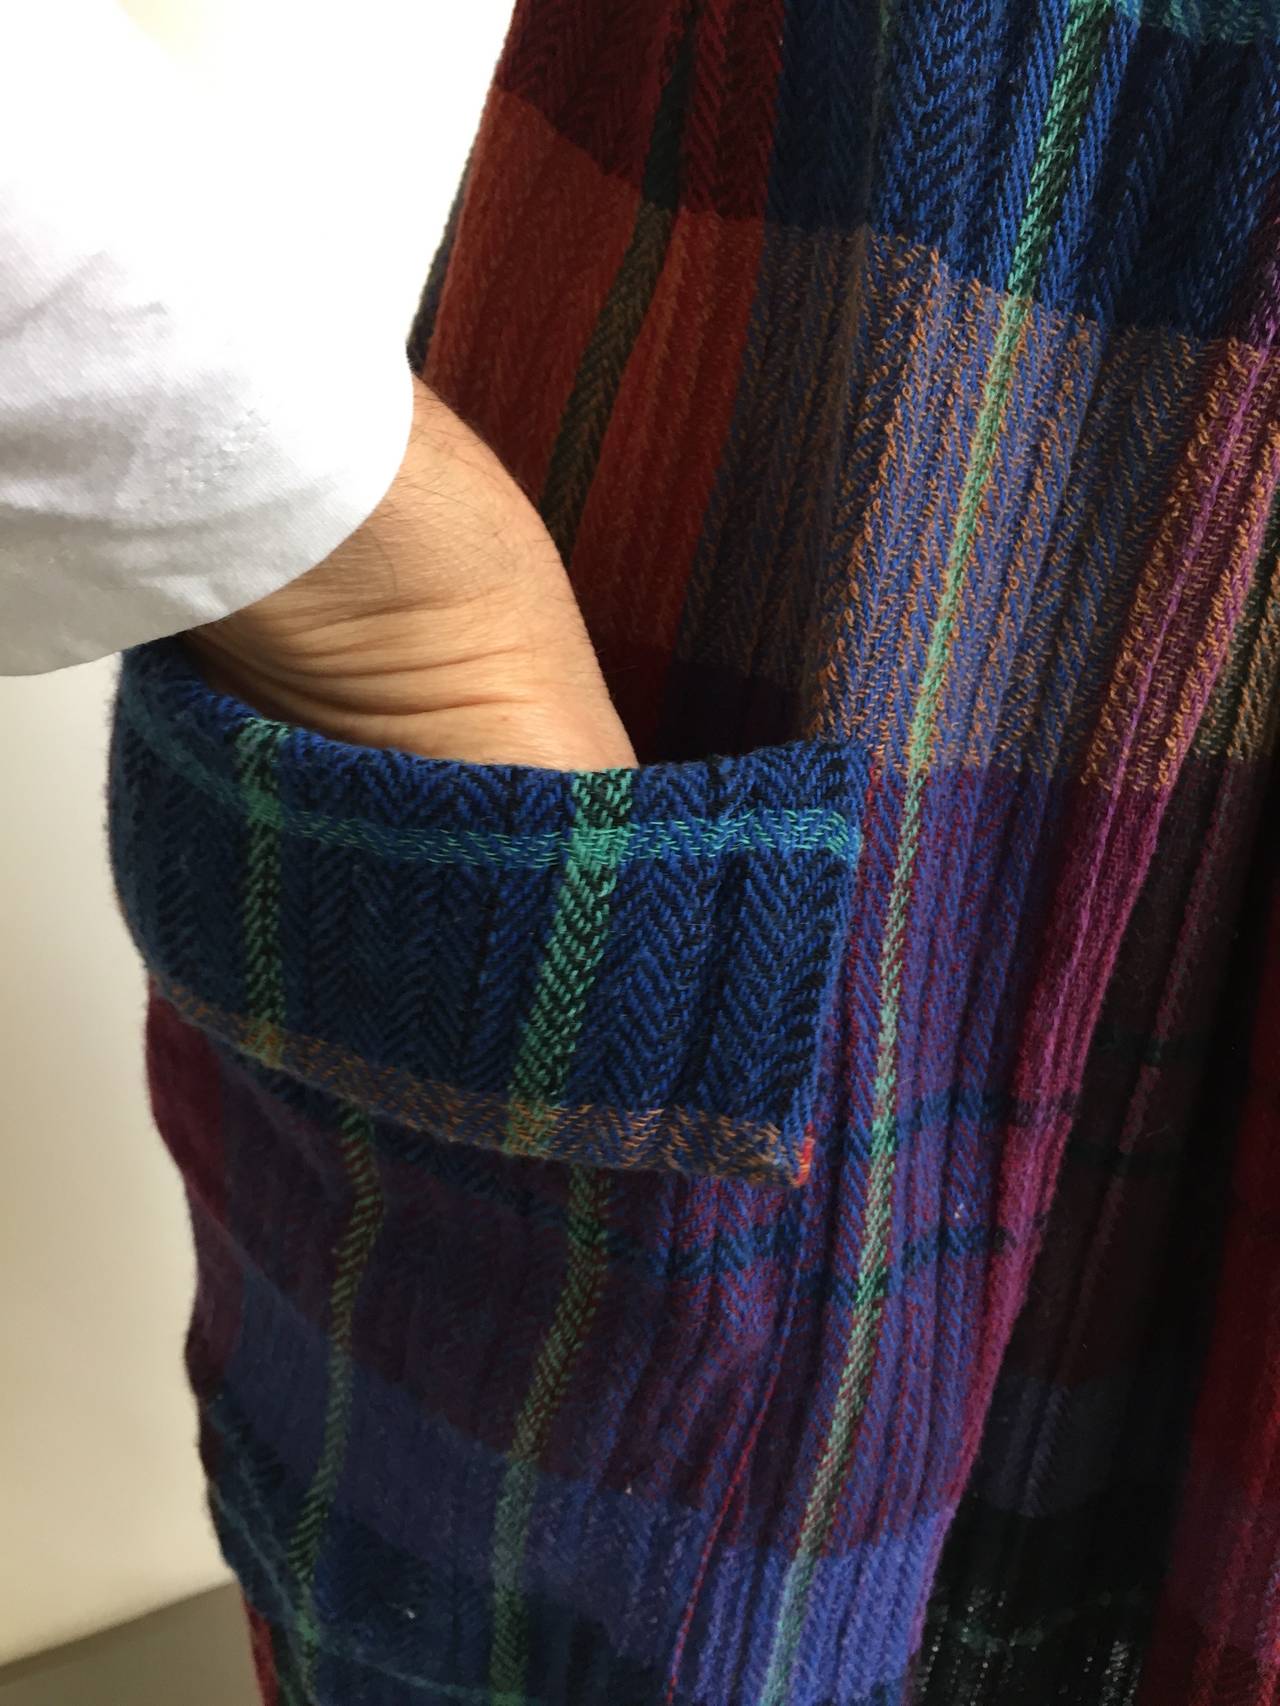 Mary McFadden Plaid Skirt with Side Pockets, 1980s   In Good Condition For Sale In Atlanta, GA